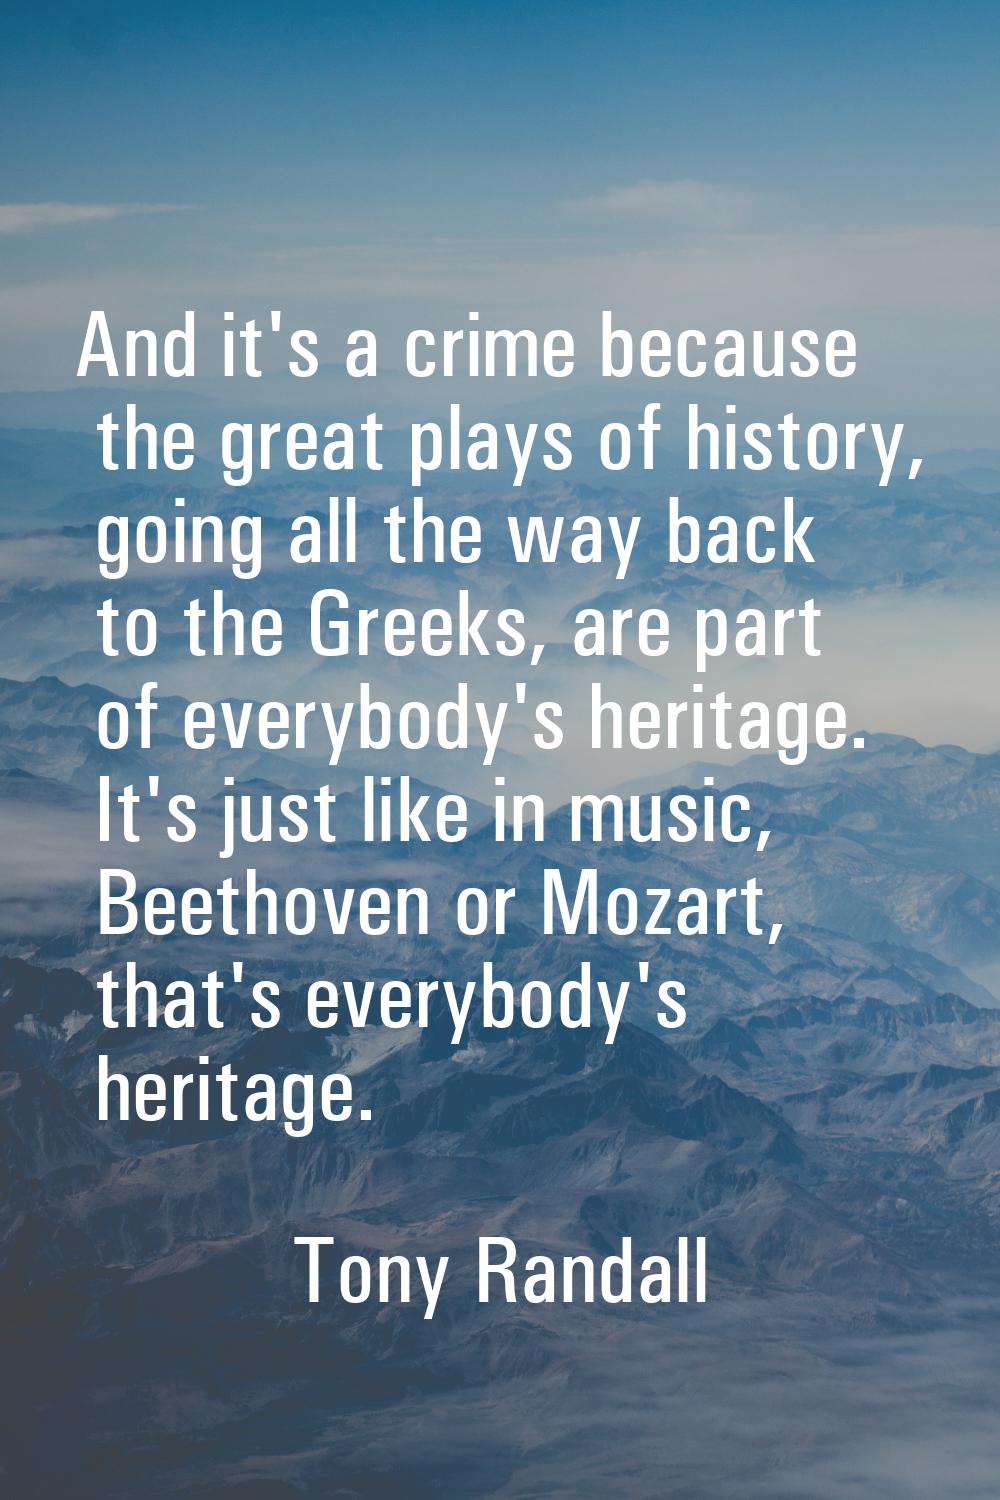 And it's a crime because the great plays of history, going all the way back to the Greeks, are part